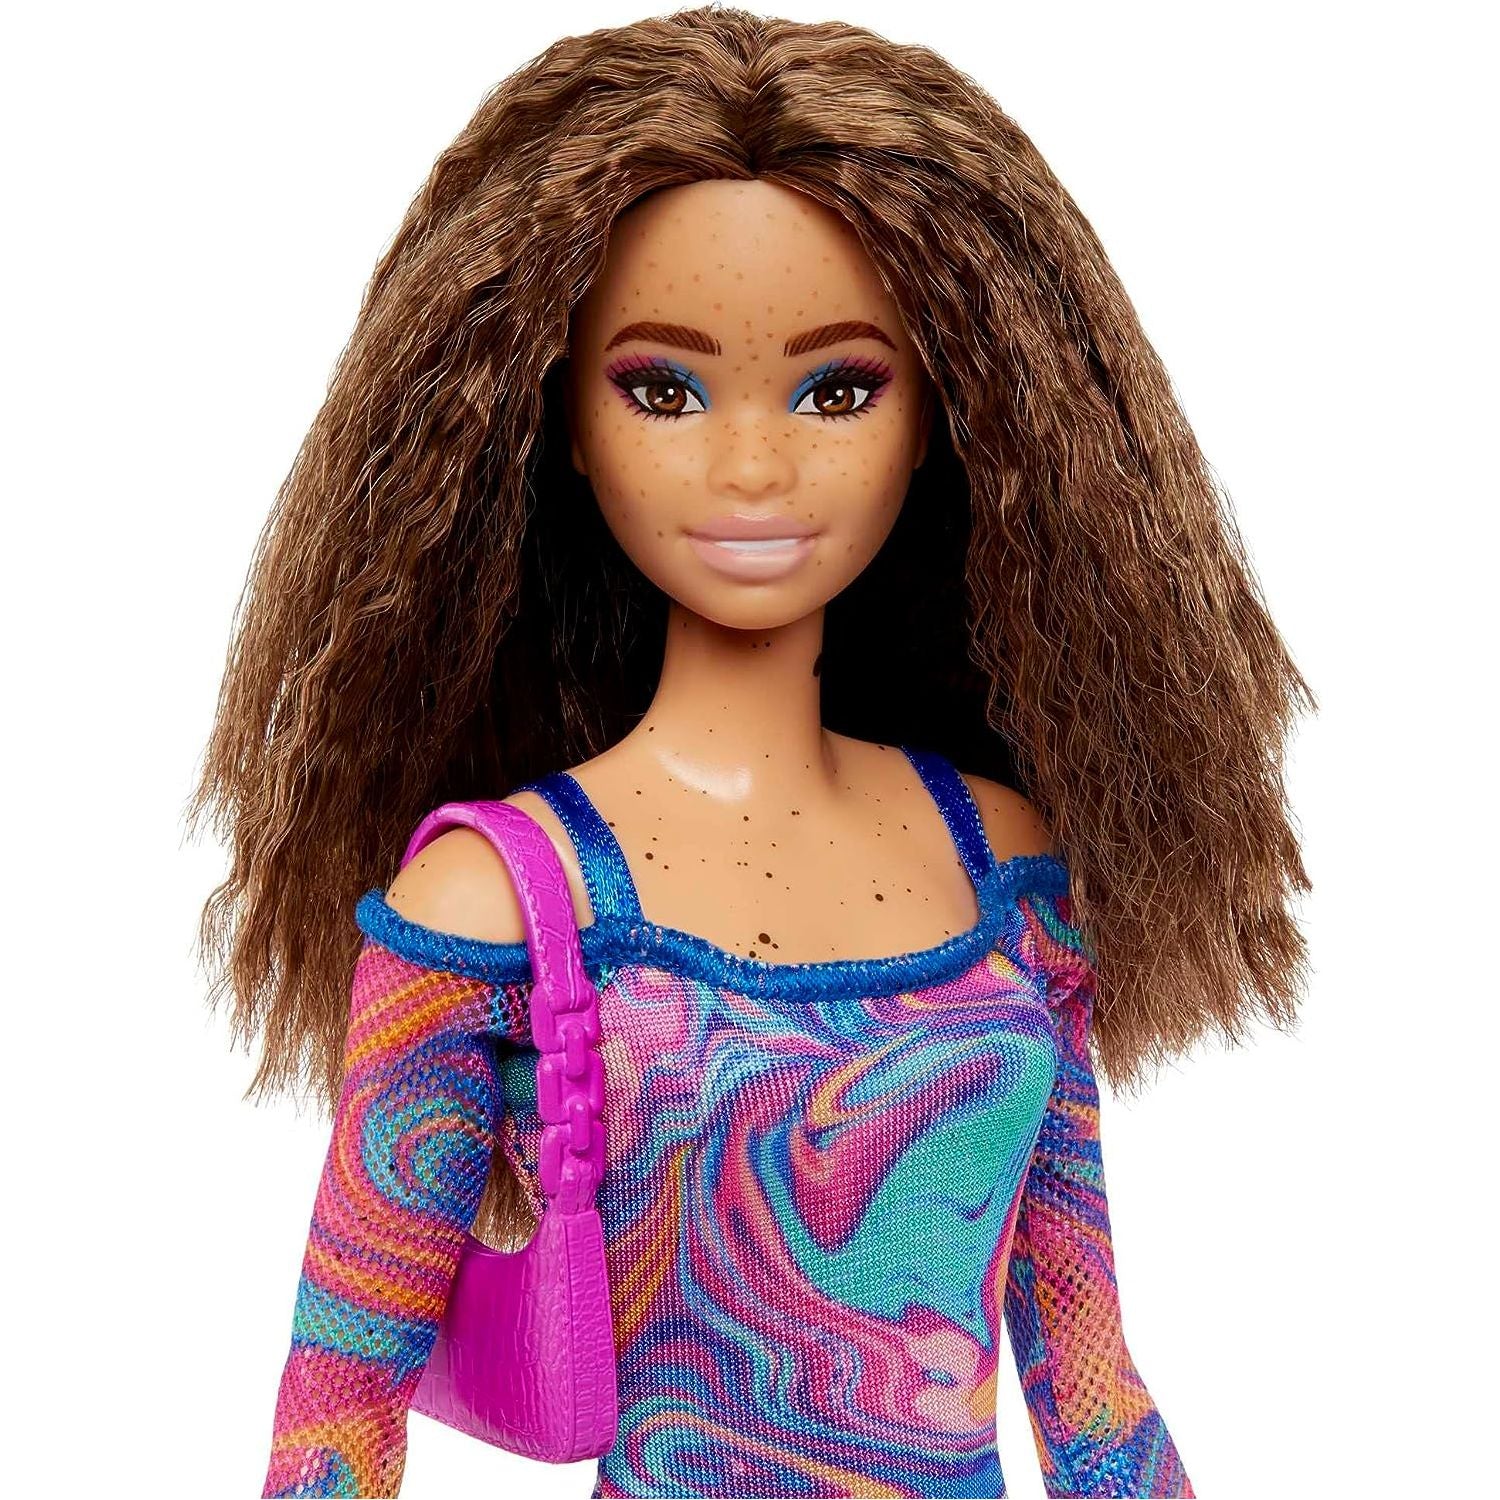 Barbie Fashionistas Doll #206 with Crimped Hair & Freckles, Rainbow Marble-Print Dress, Green Mules & Purse